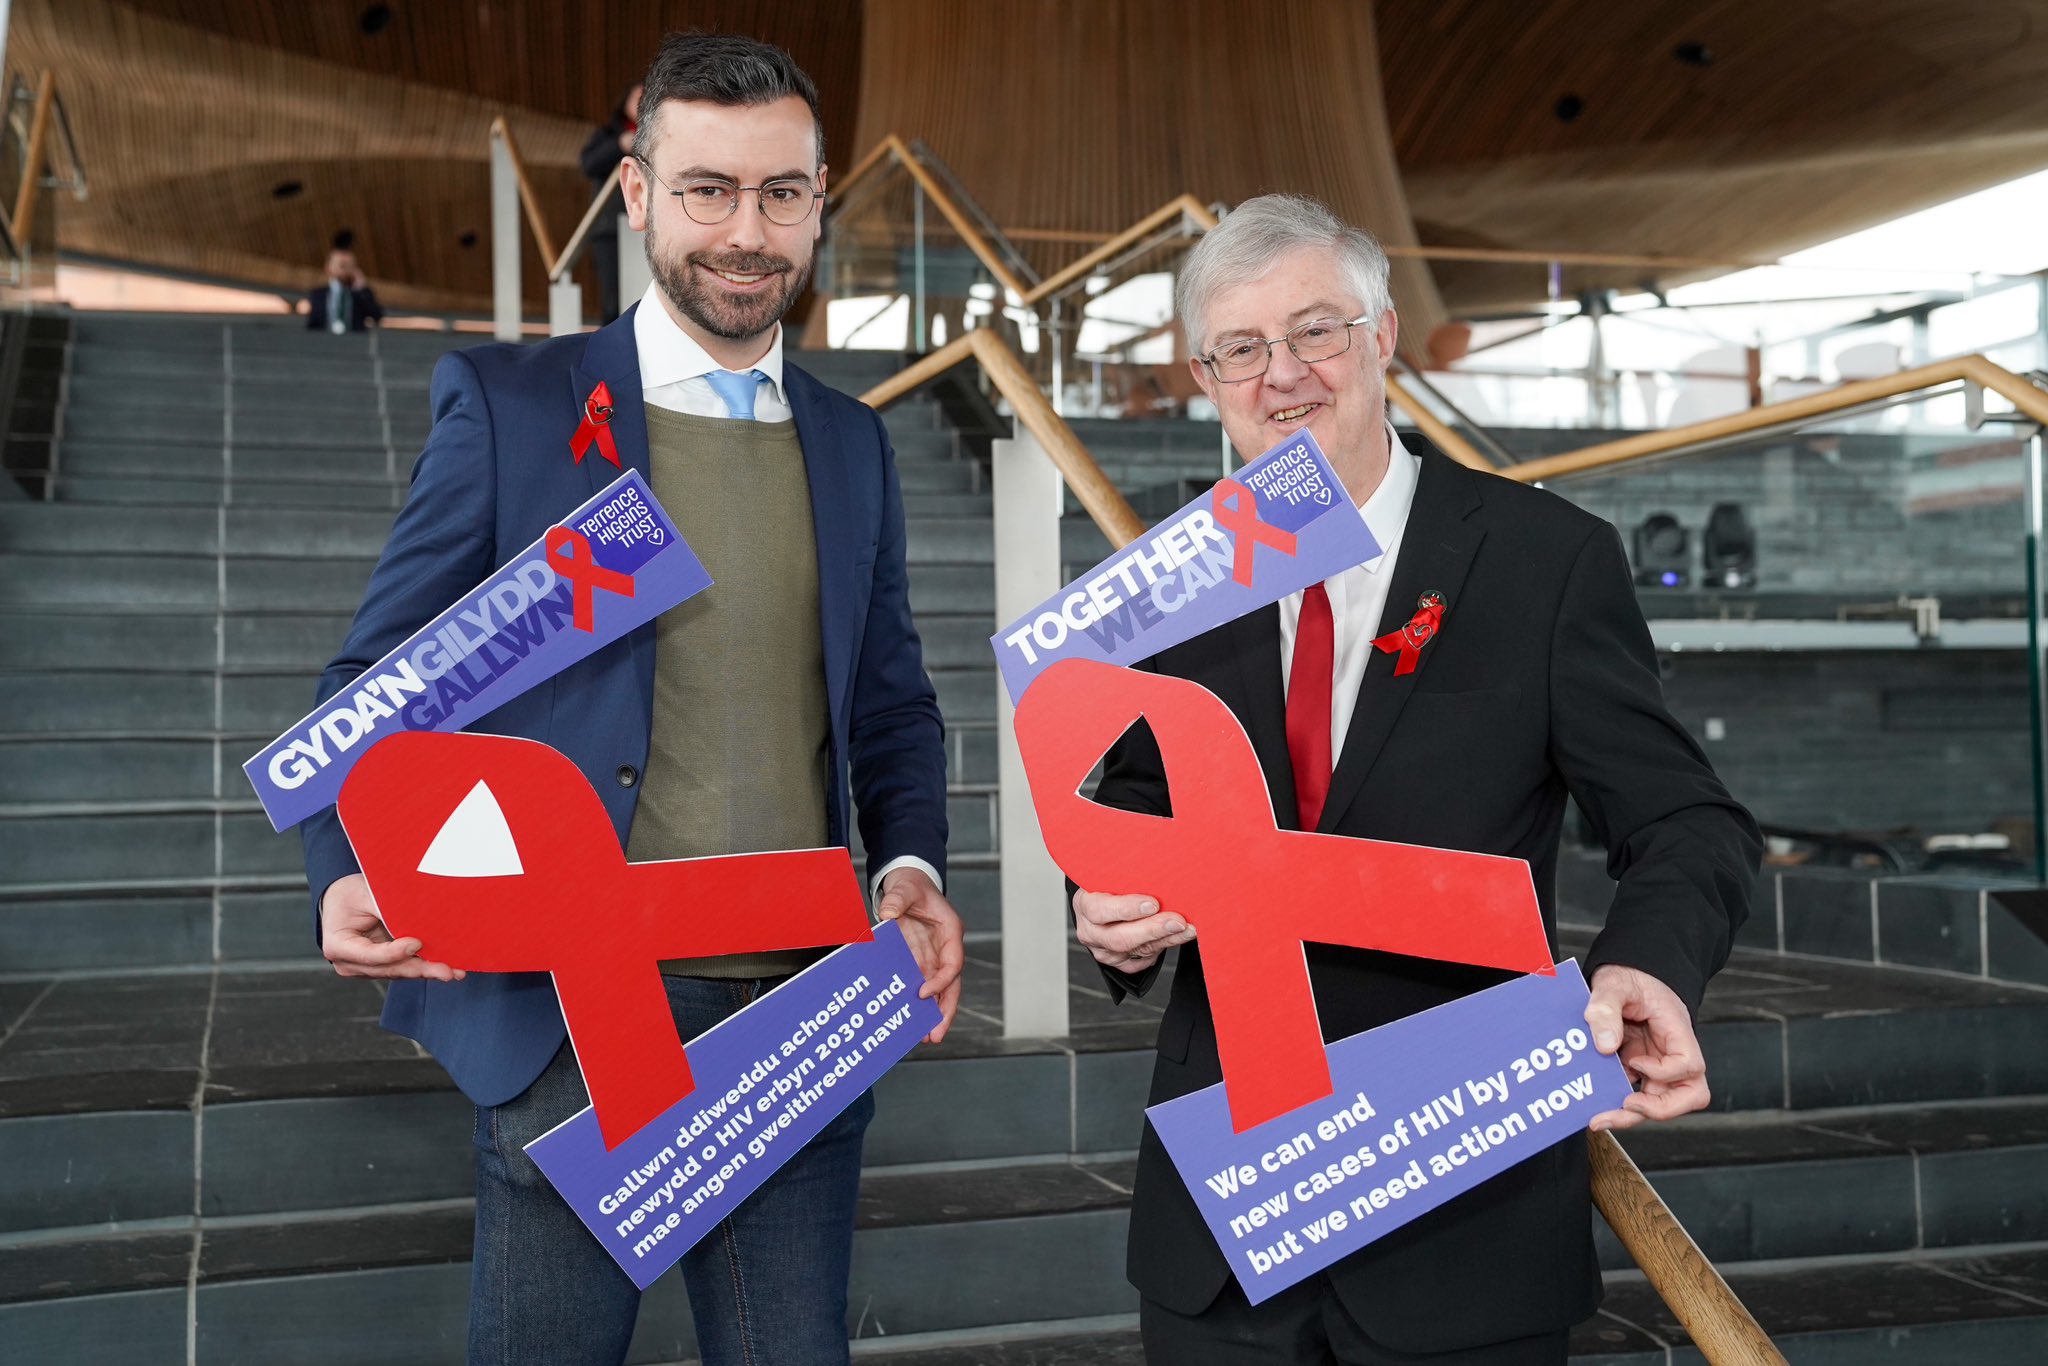 Rhys Goode and Mark Drakeford with posters saying "we can end new cases of HIV by 2030 but we need action now" in English and Welsh